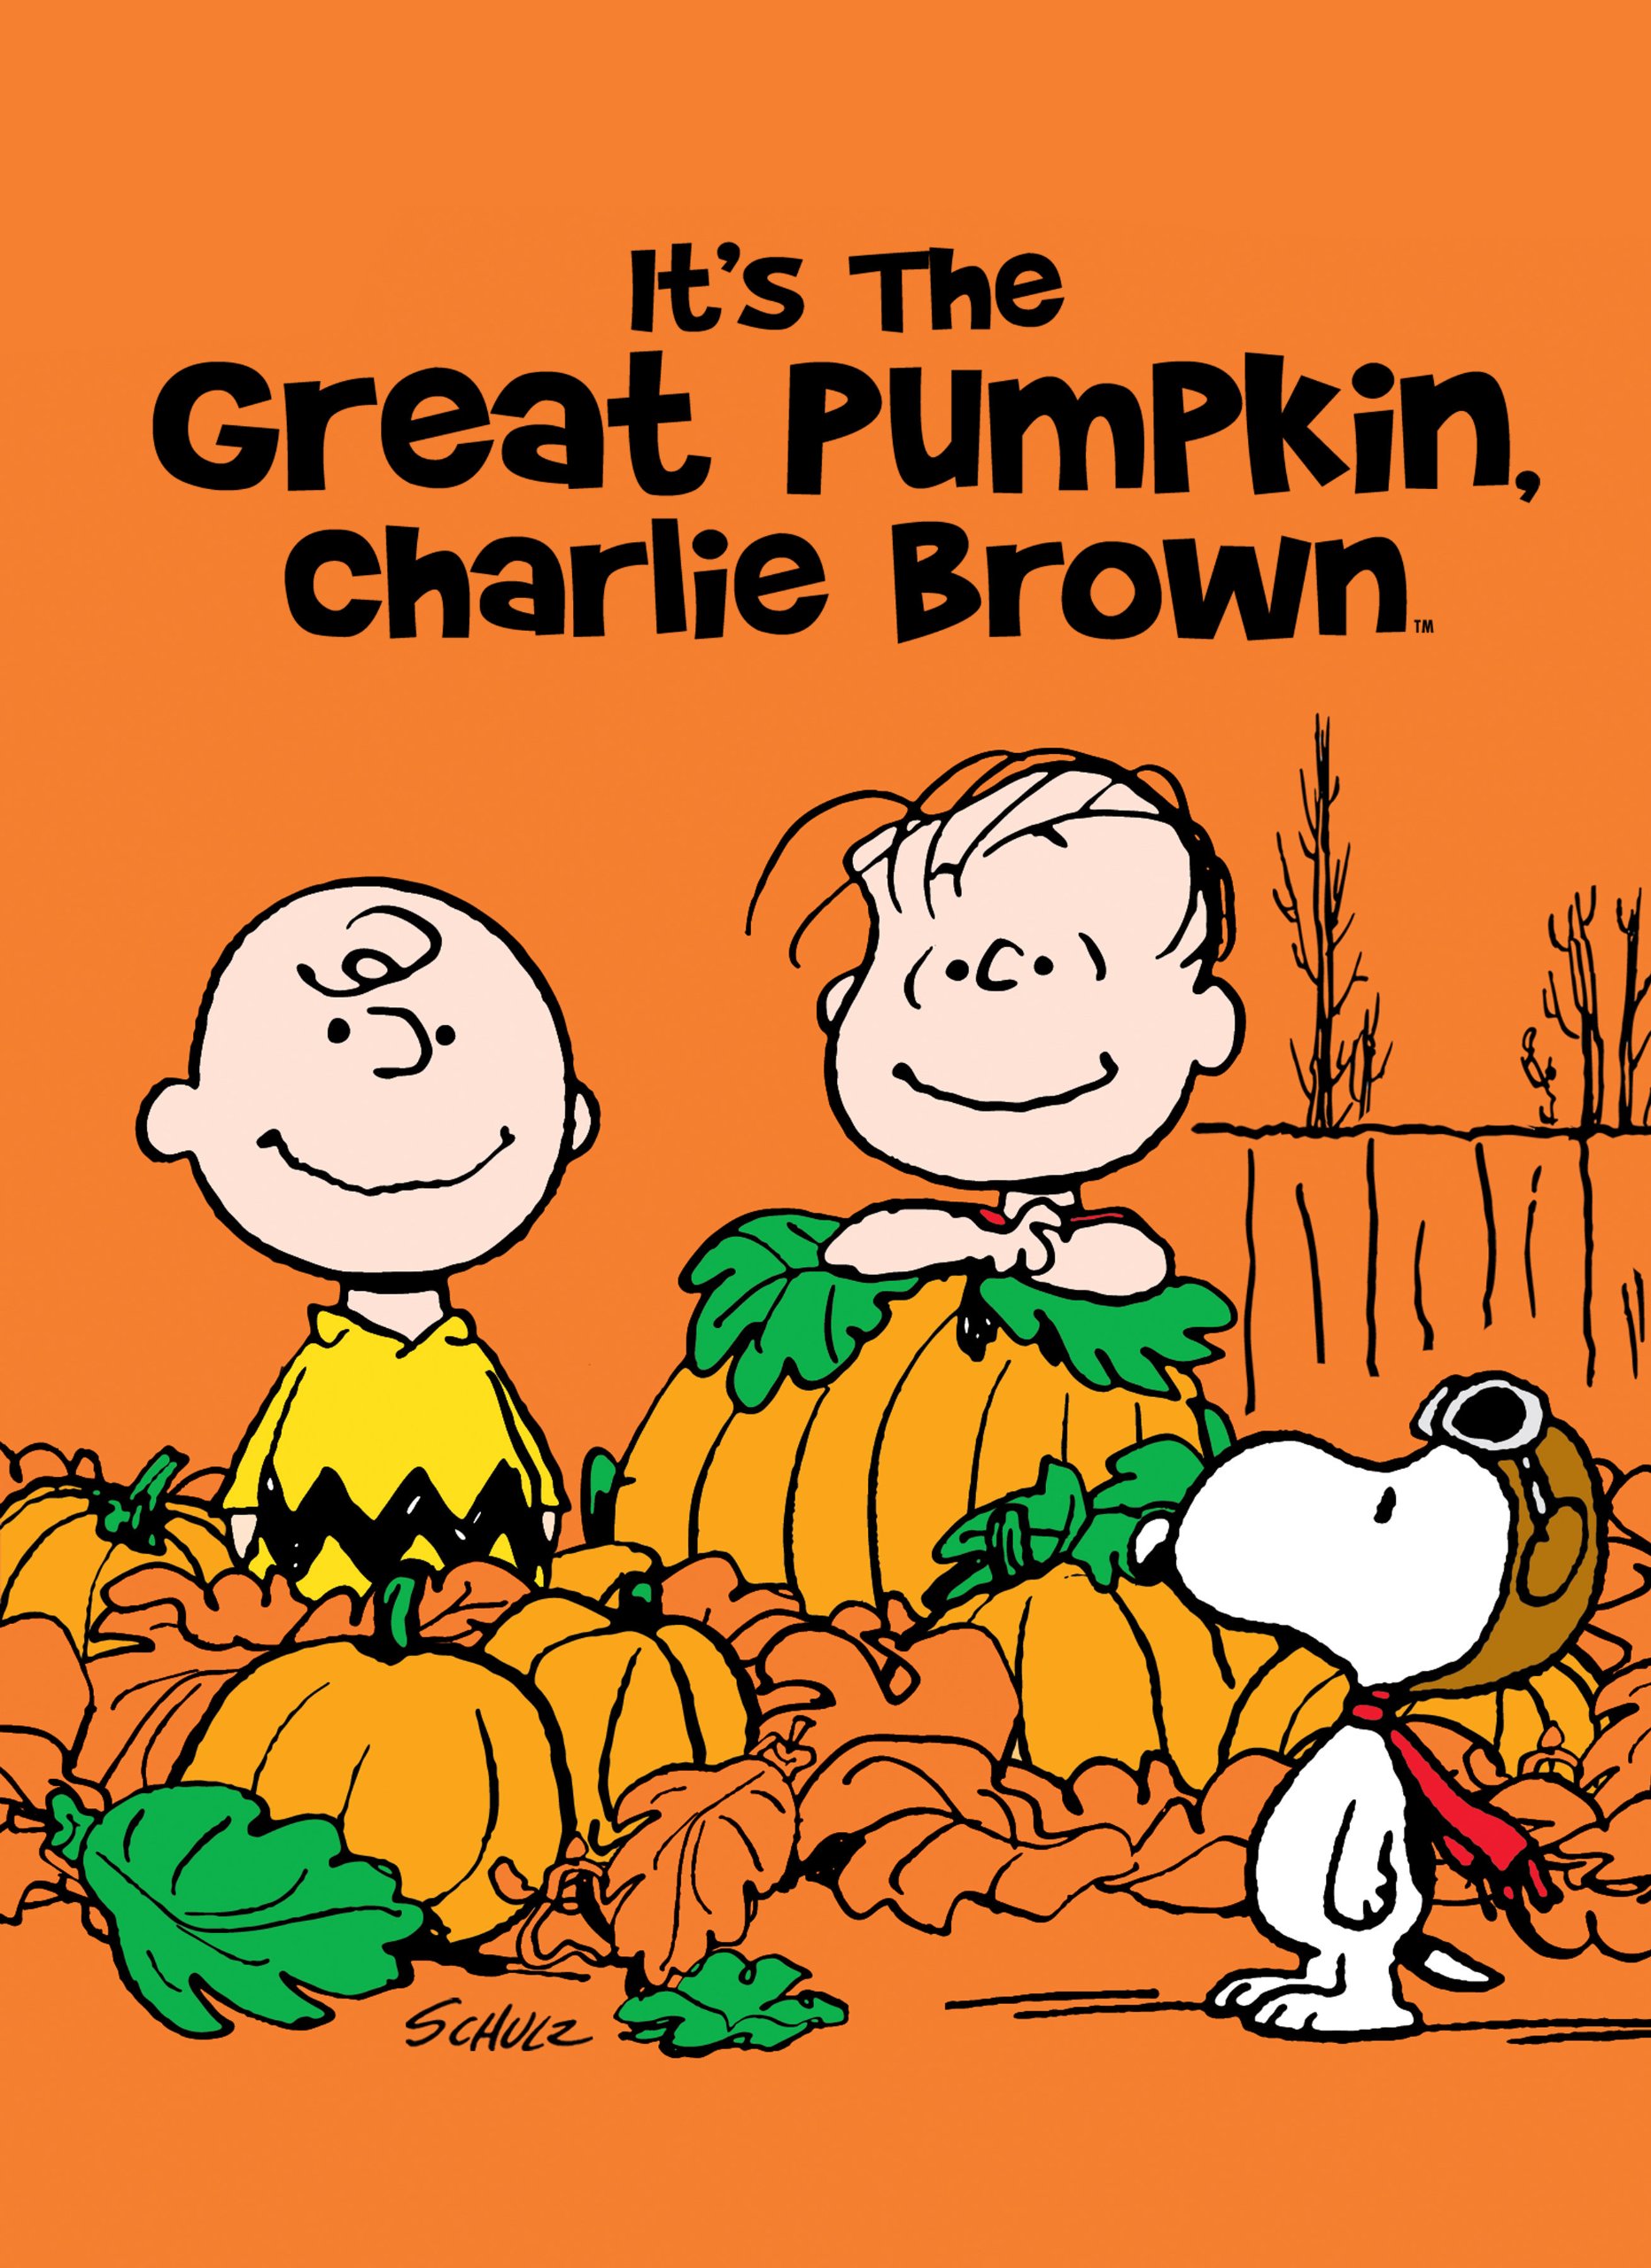 Its' the Great Pumpkin Charlie Brown